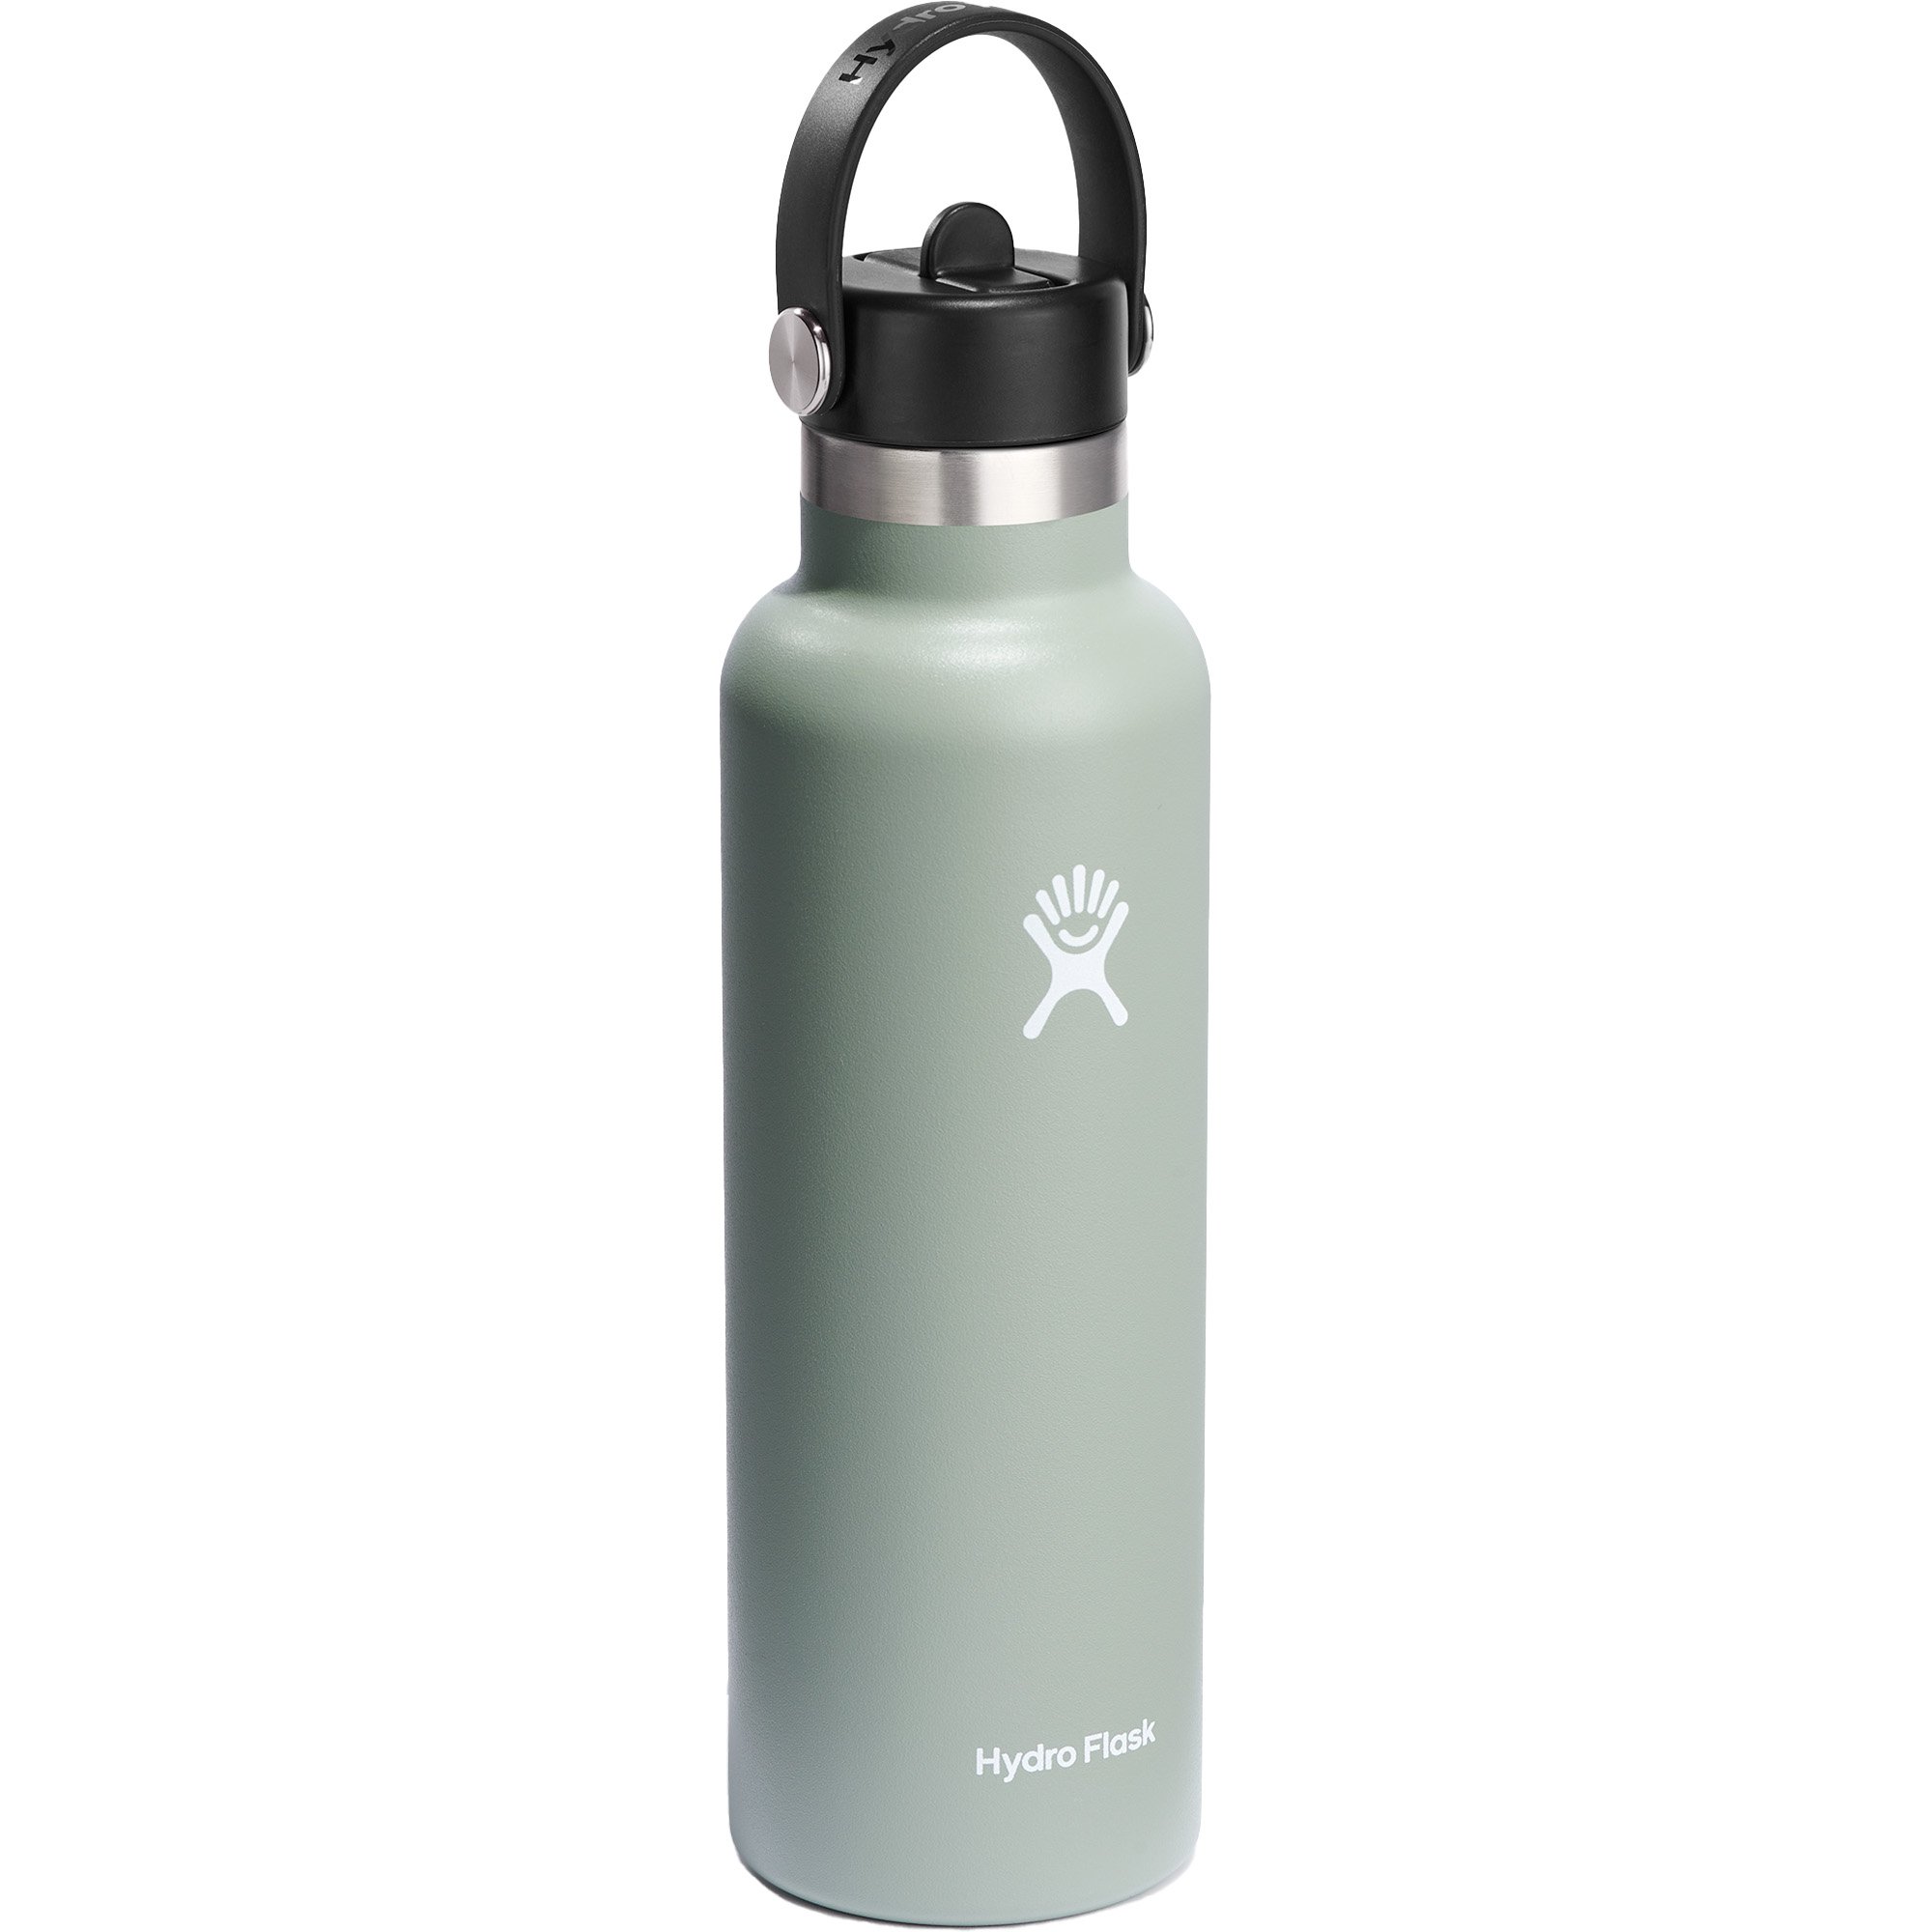 Photos - Other goods for tourism Hydro Flask 21oz Standard Mouth w/ Flex Straw Cap Water Bottle, Agave S21F 